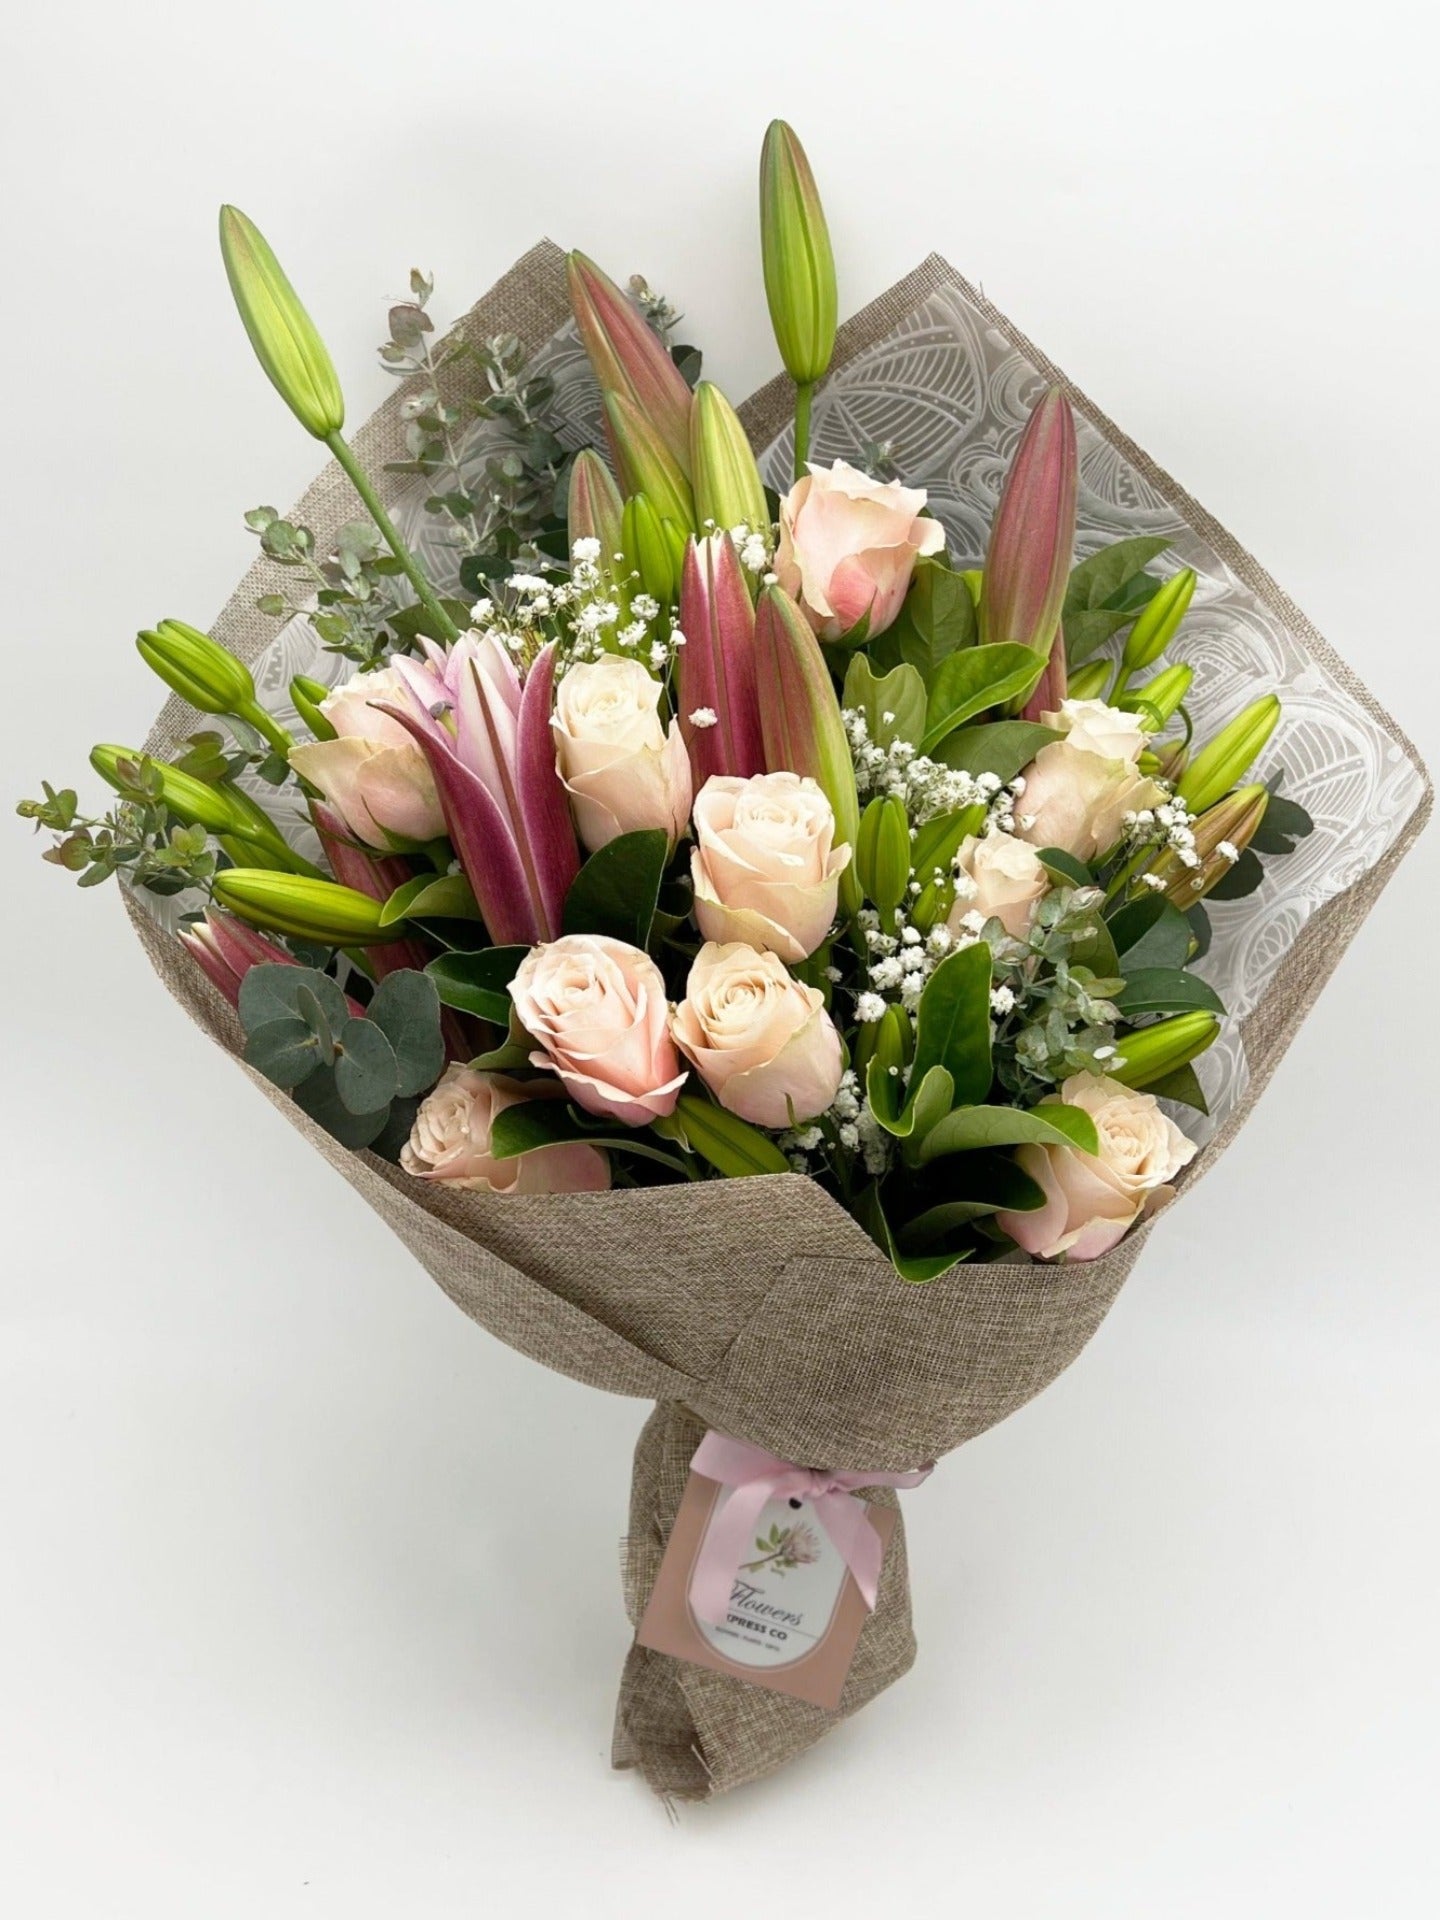 A bouquet of lilies and pink roses, crafted by a Melbourne florist from Flowers Express Co, elegantly wrapped in jute against a pristine white wall backdrop.